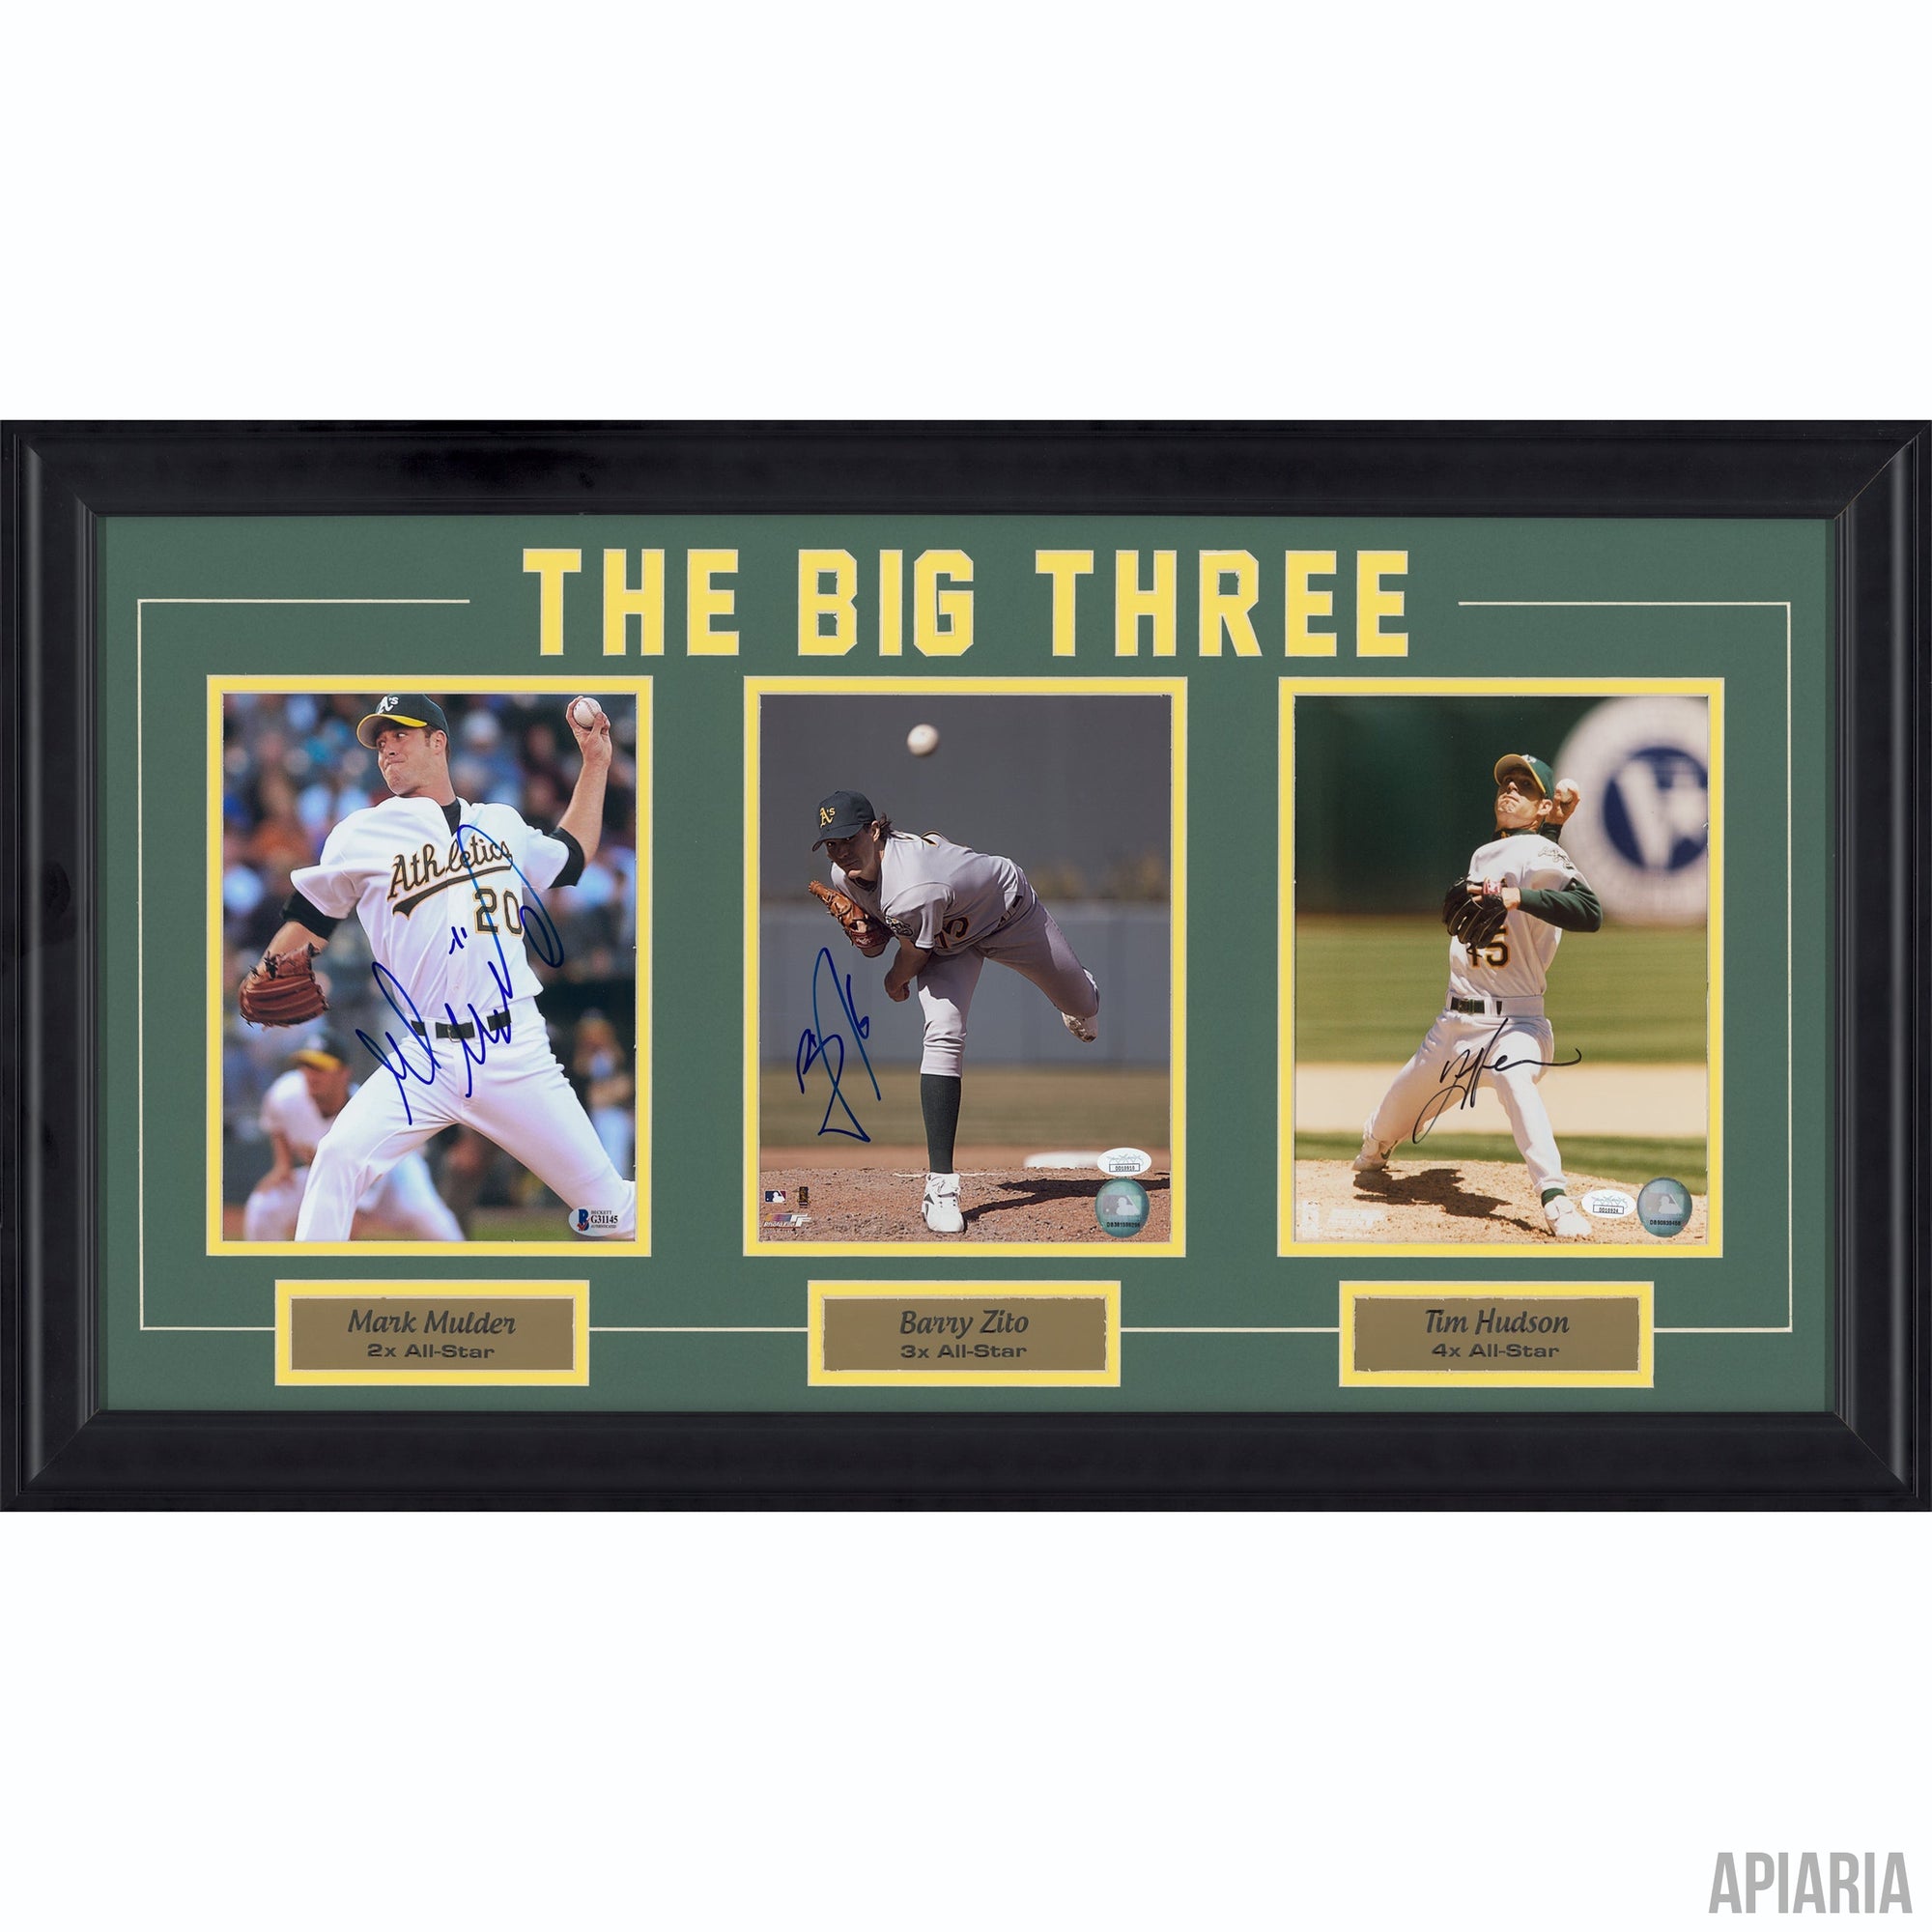 The Big Three autographed by Tim Hudson, Mark Mulder & Barry Zito, Oakland A's-Framed Item-Apiaria